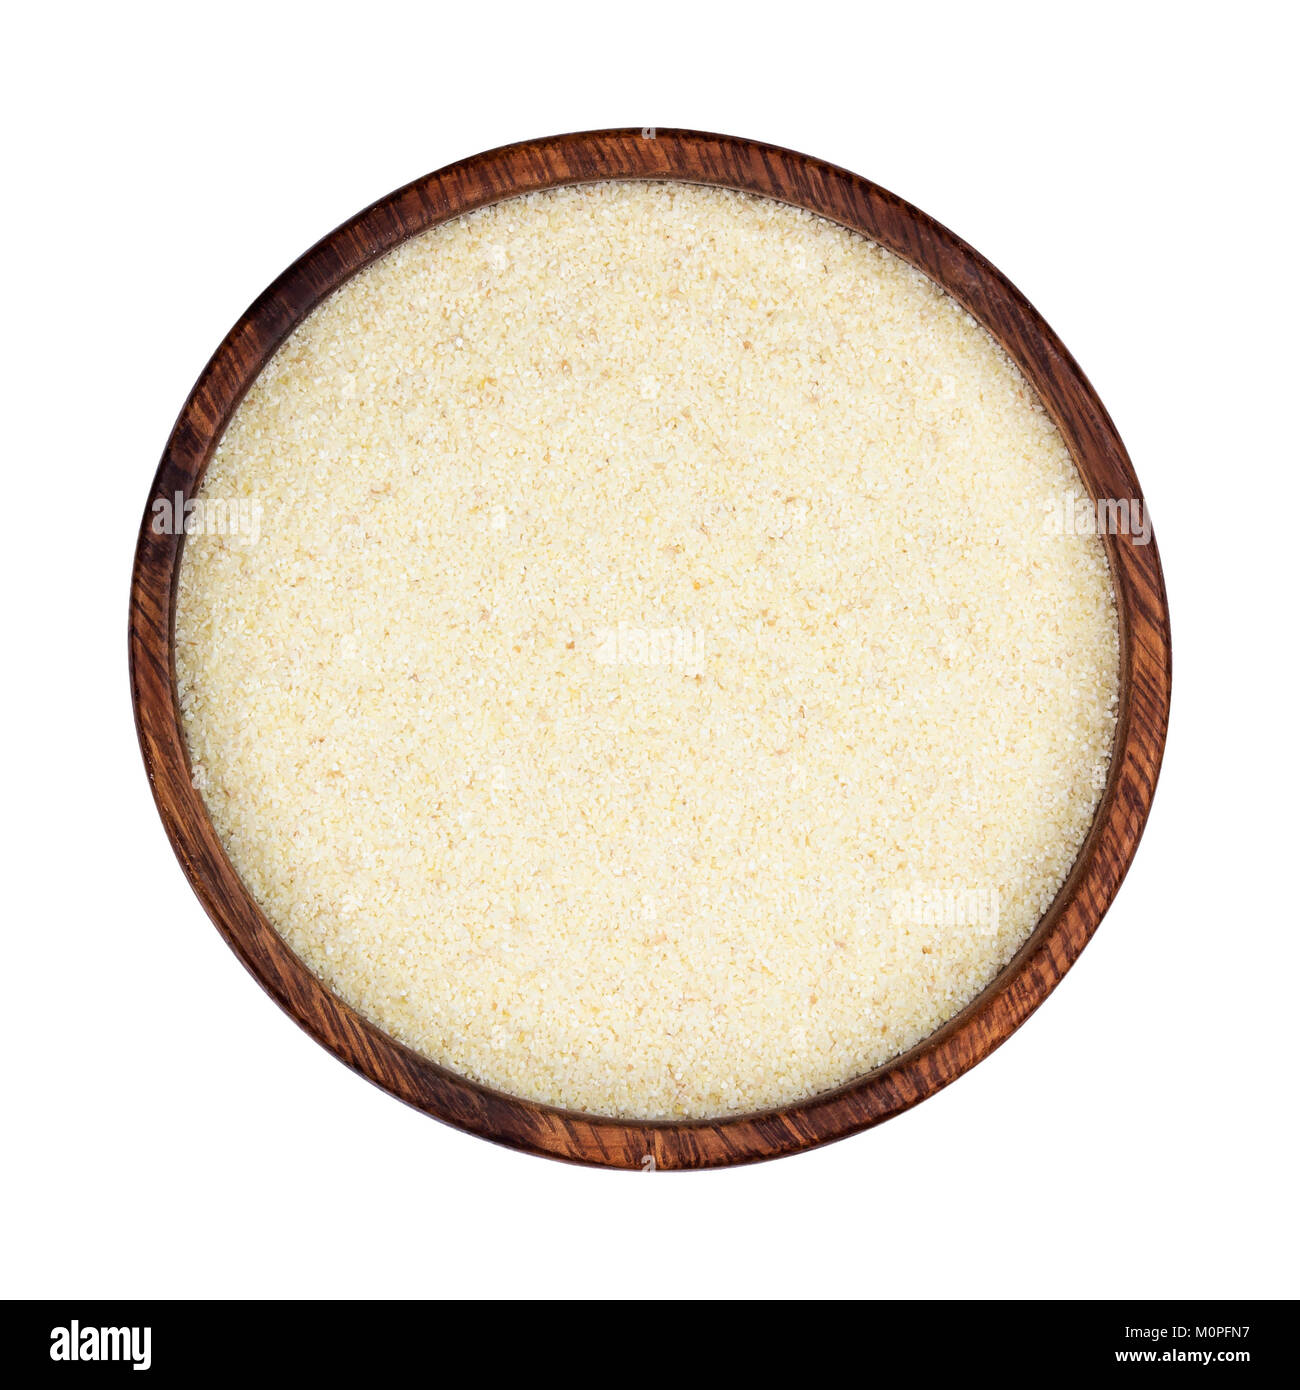 Semolina isolated on white background, top view Stock Photo